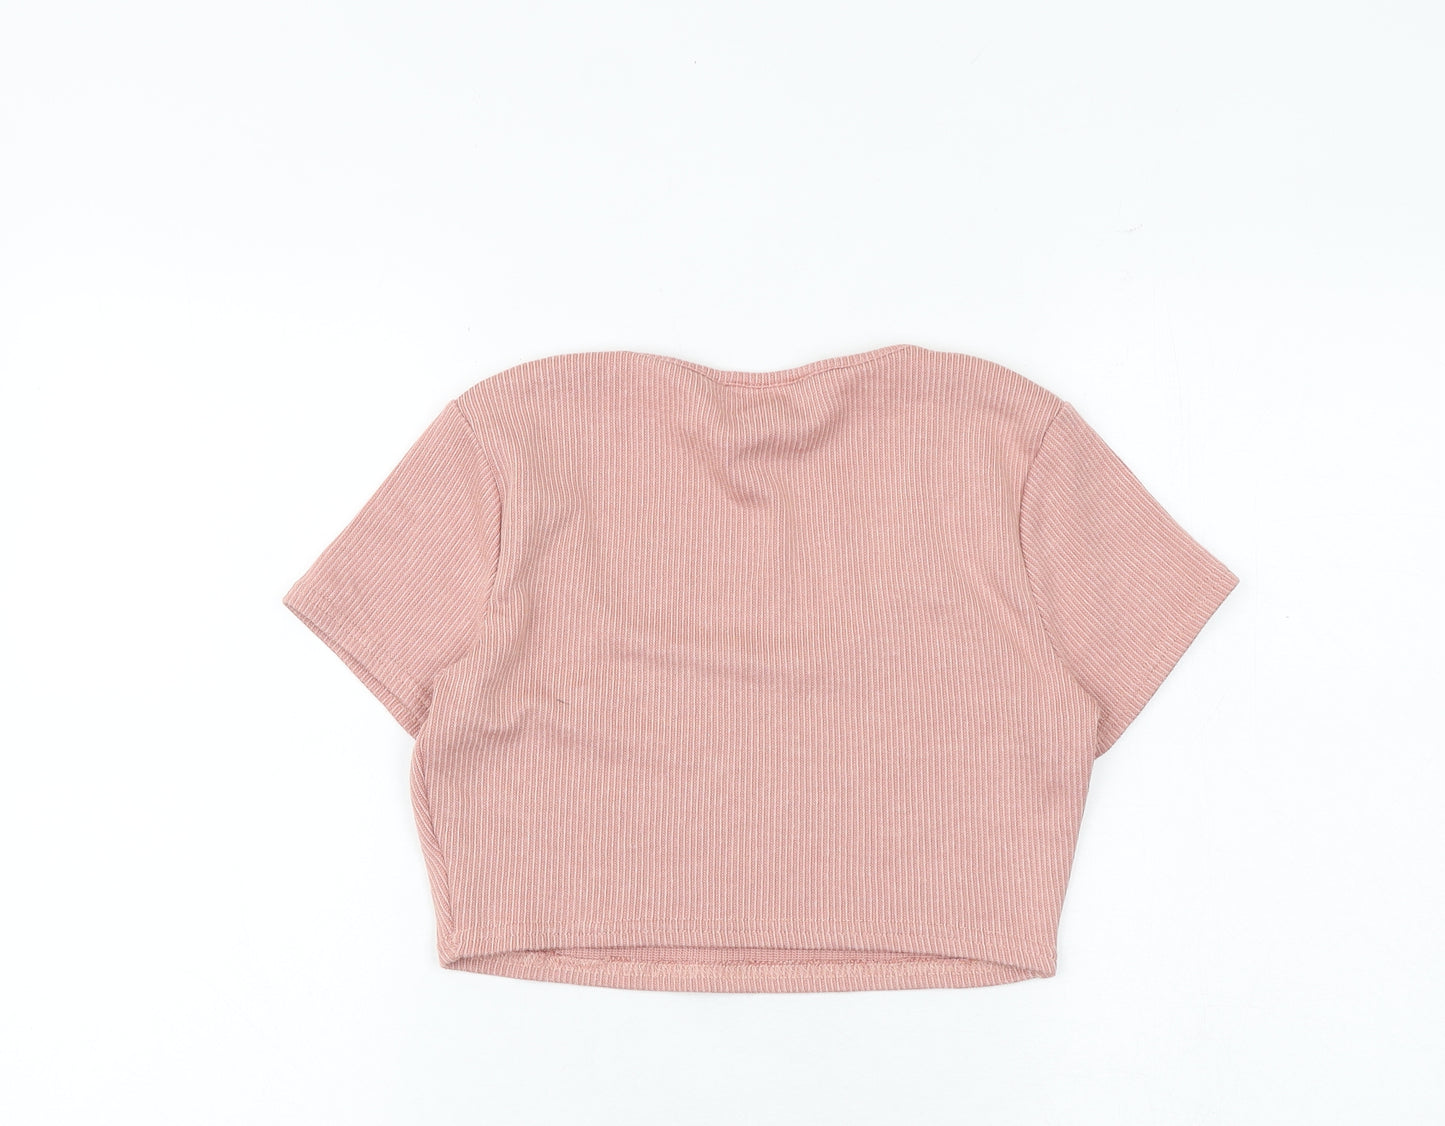 Missguided Womens Pink Polyester Cropped T-Shirt Size 10 Scoop Neck